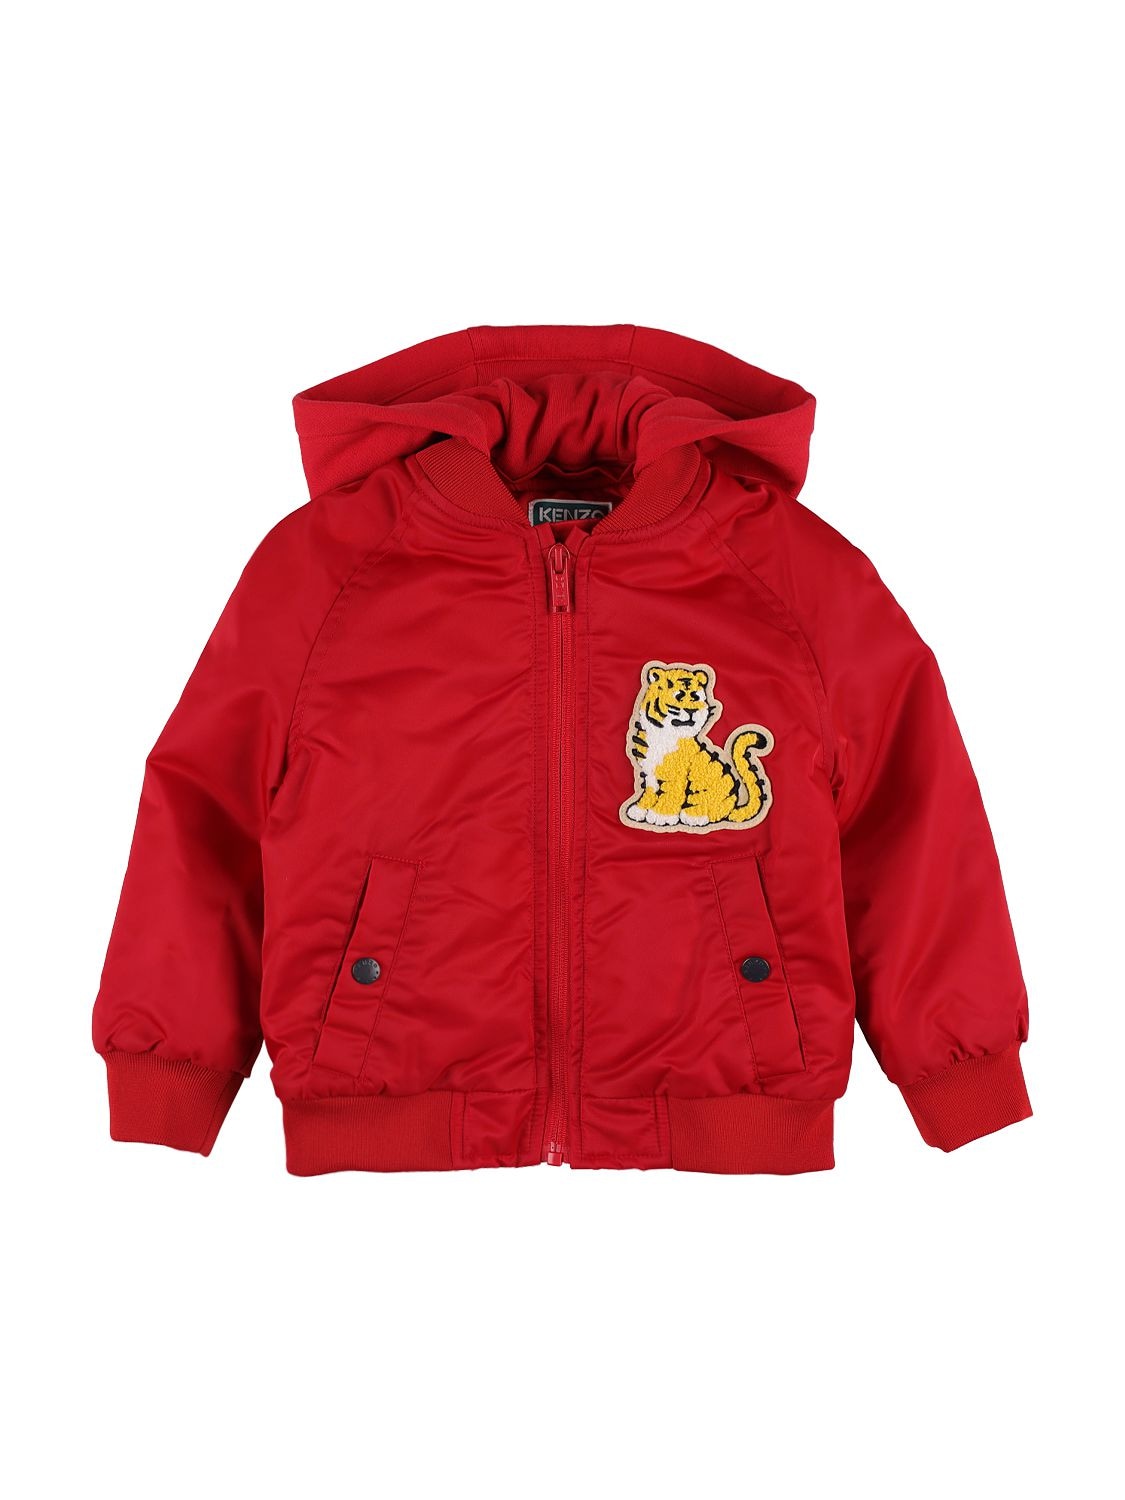 Kenzo Kids' Logo Embroidered Nylon Jacket W/ Patch In Red